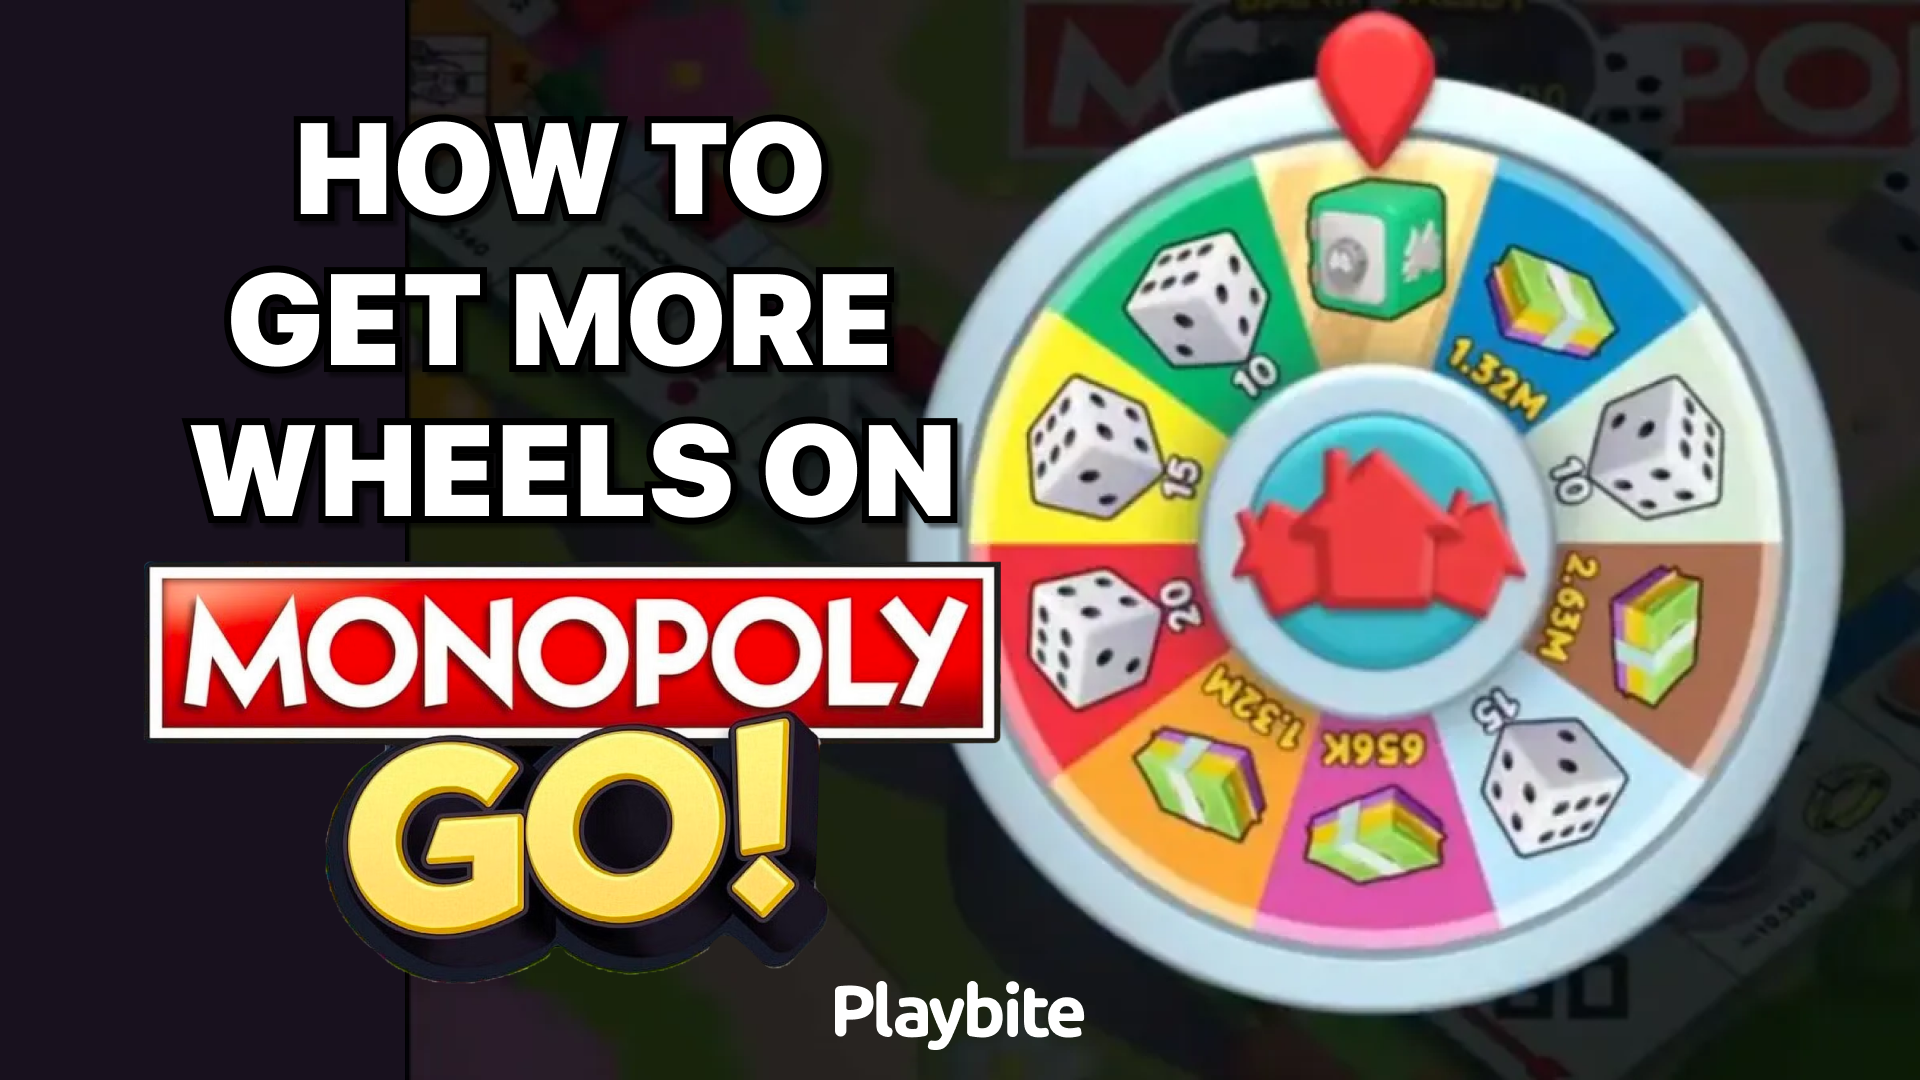 How To Get More Wheels On Monopoly GO!